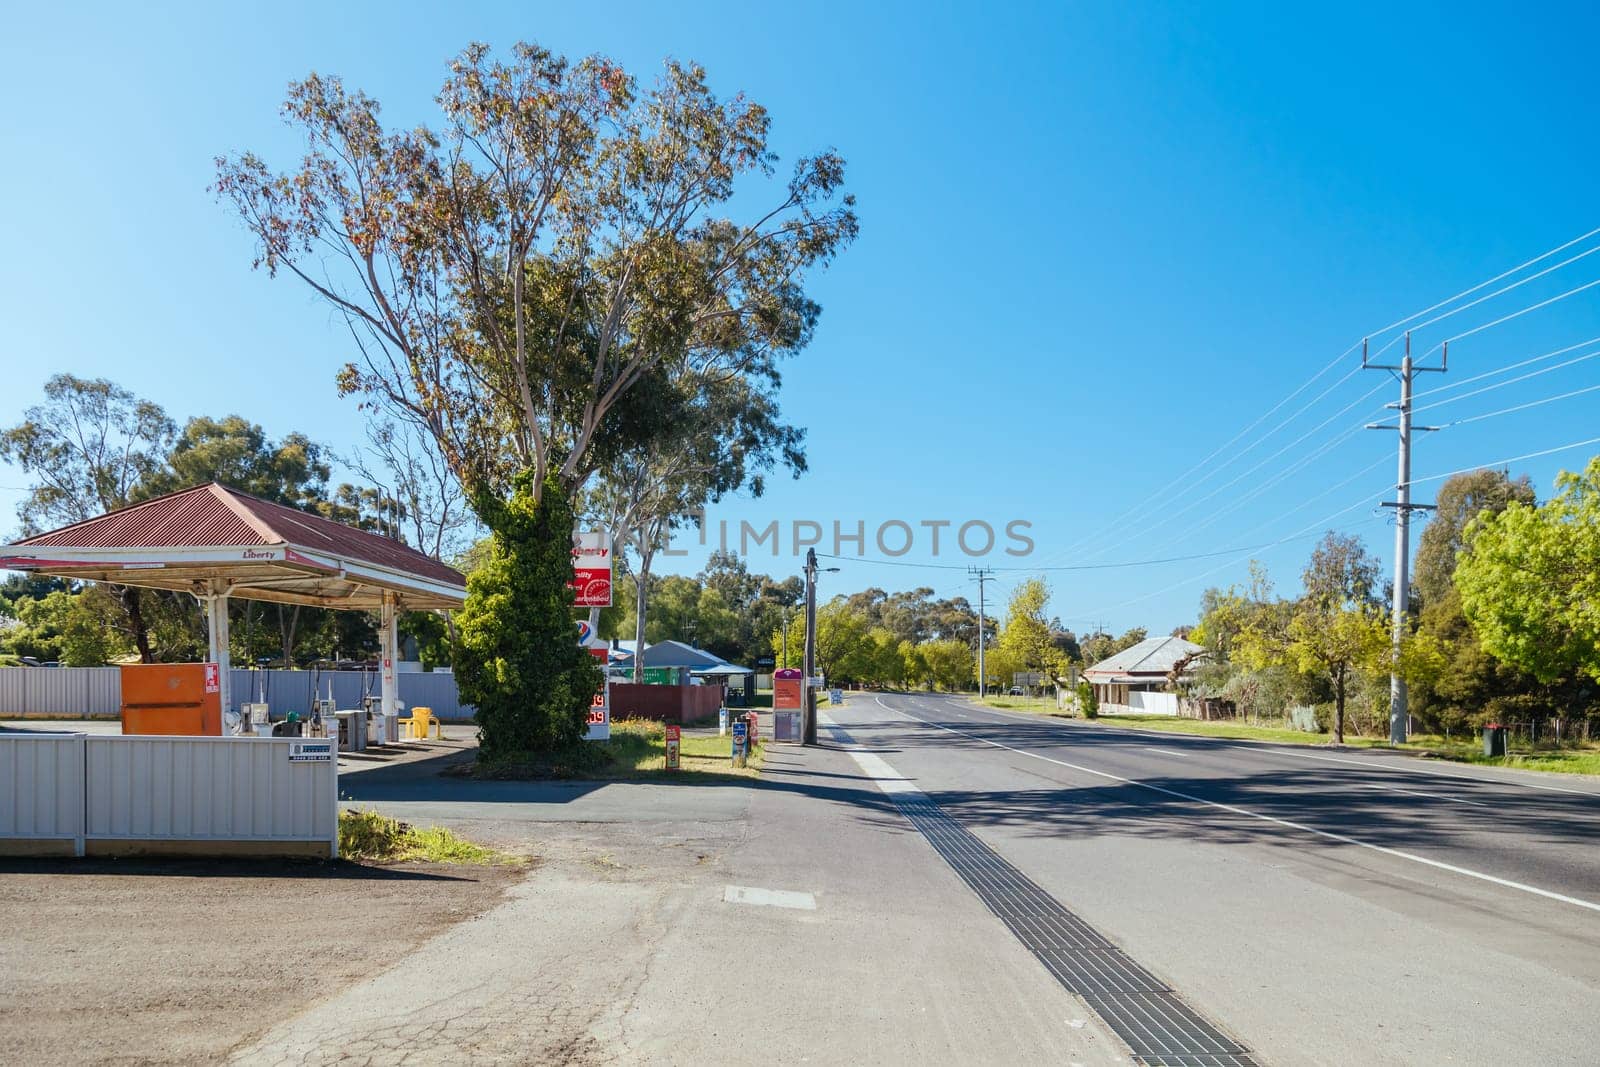 AXEDALE, AUSTRALIA - SEPTEMBER 24: Historic Victorian architecture and main street of Axedale on a warm spring morning in Axedale, Victoria, Australia in 2023